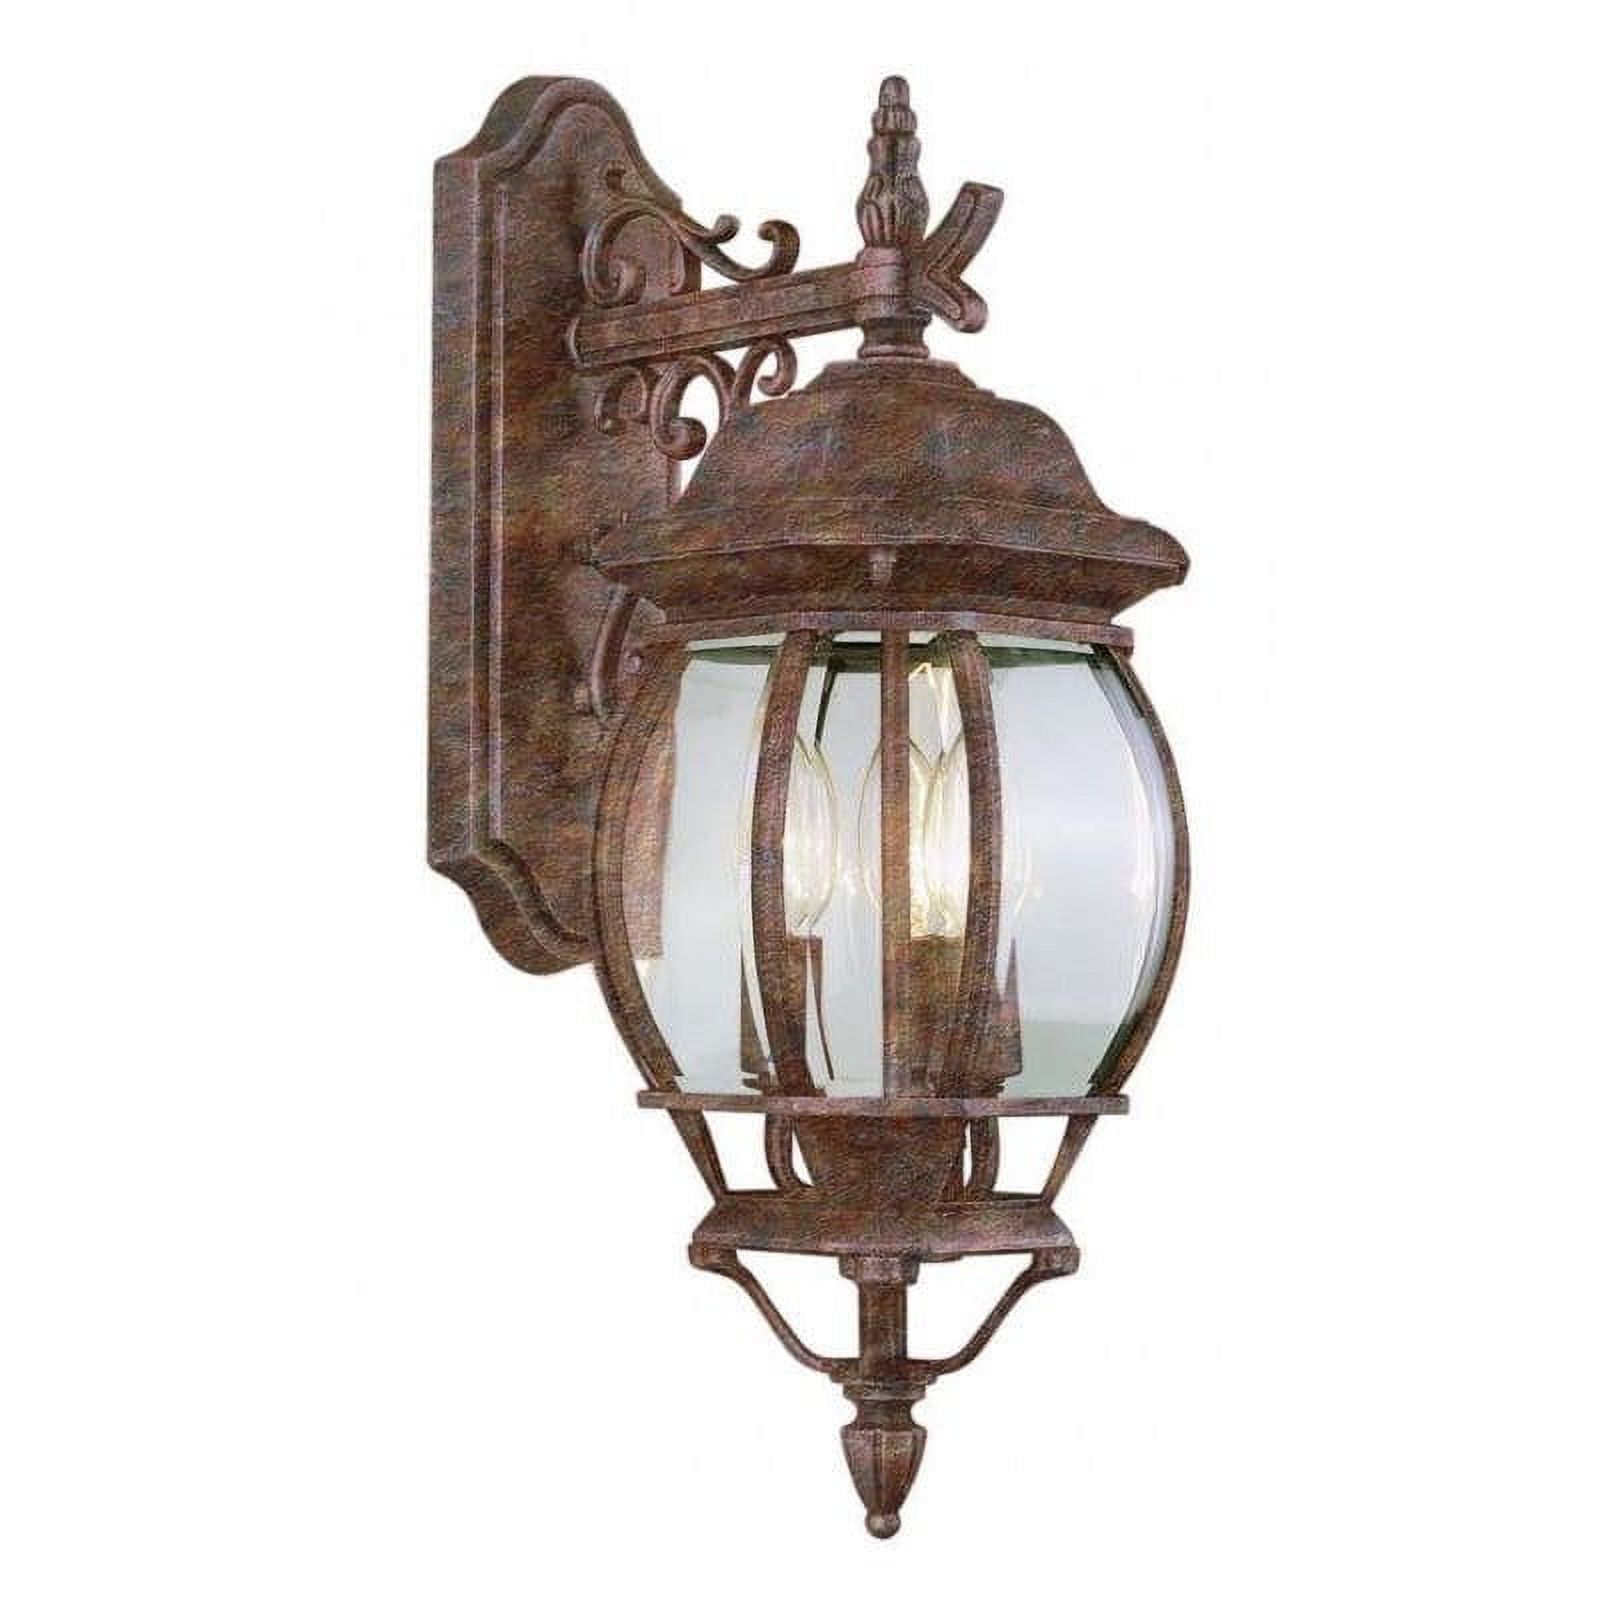 Bel Air Lighting Francisco 21 in. 3-Light Rust Lantern Outdoor Wall Light Fixture with Clear Glass - image 2 of 2